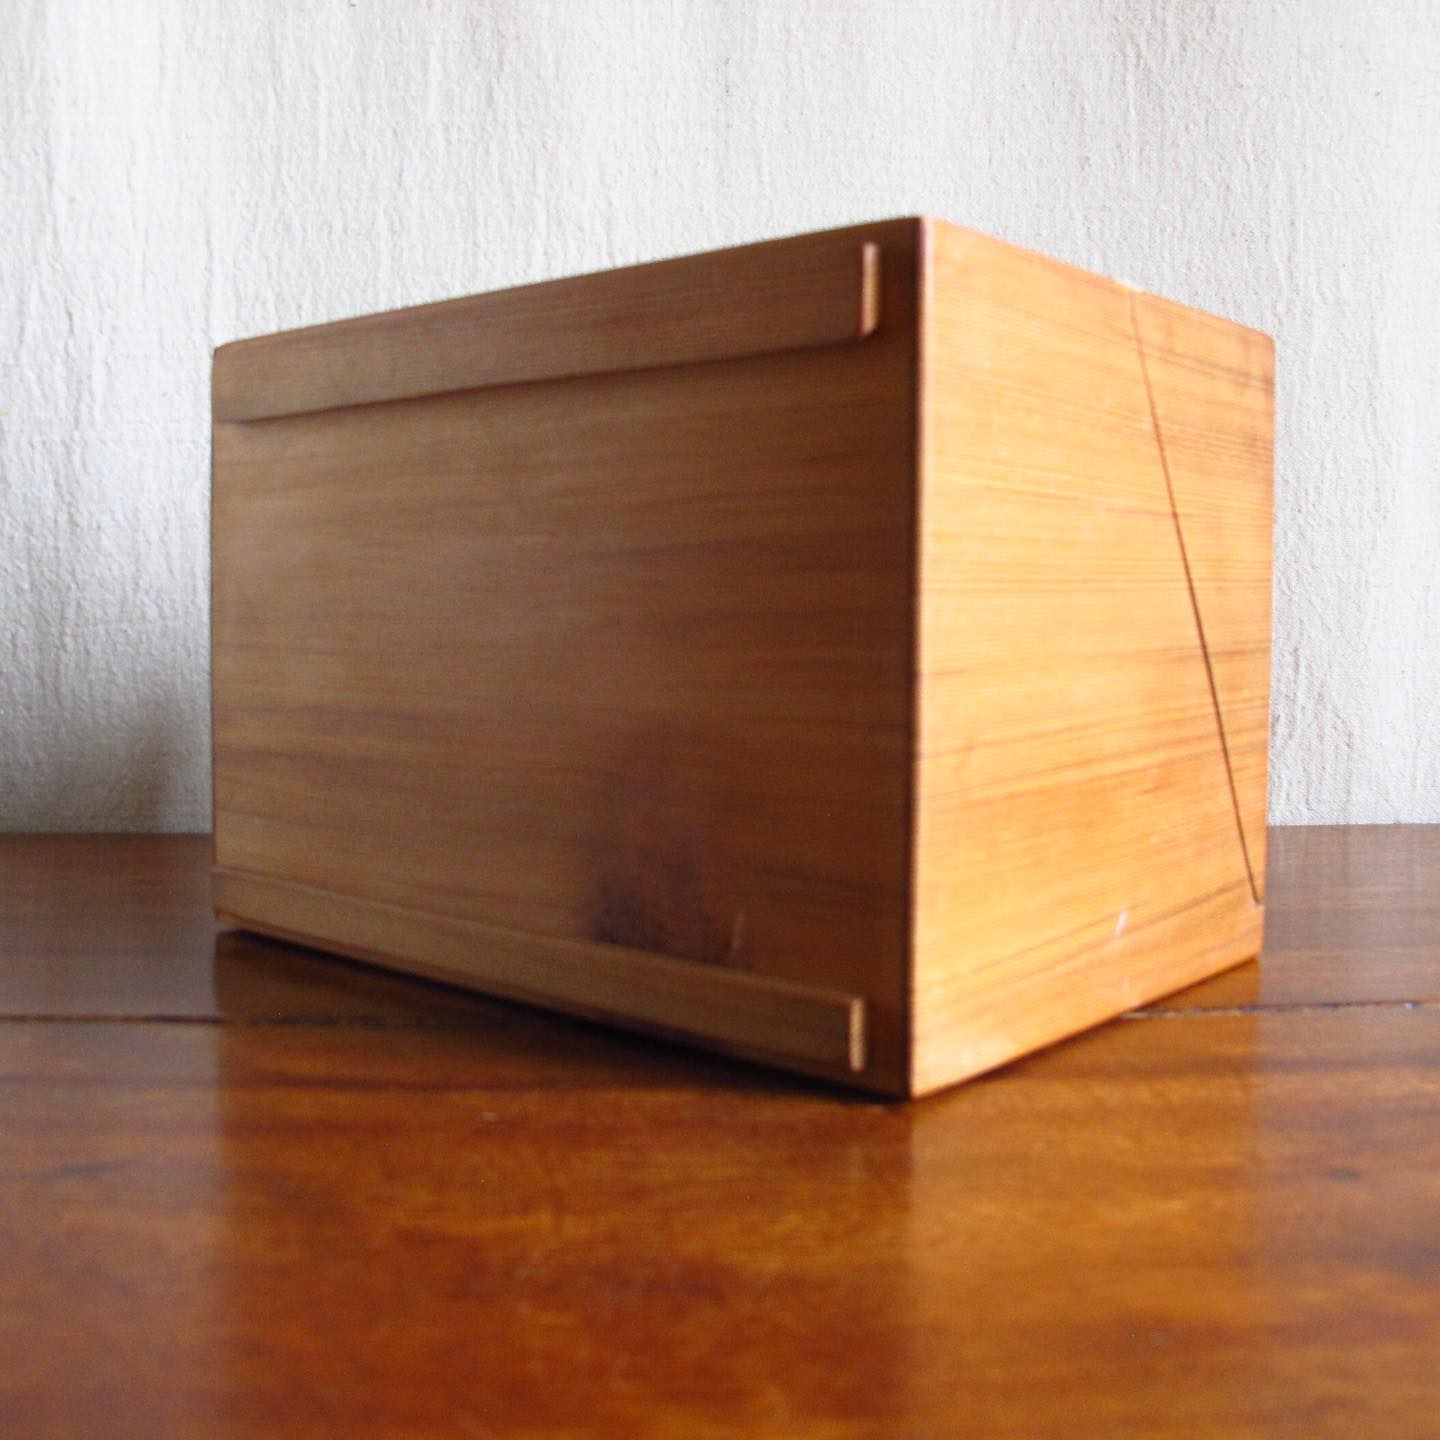 Artisan Made Midcentury Wooden Box or Desk Organizer, Canadian or possibly Japanese, signed to bottom illegibly, dated 1952